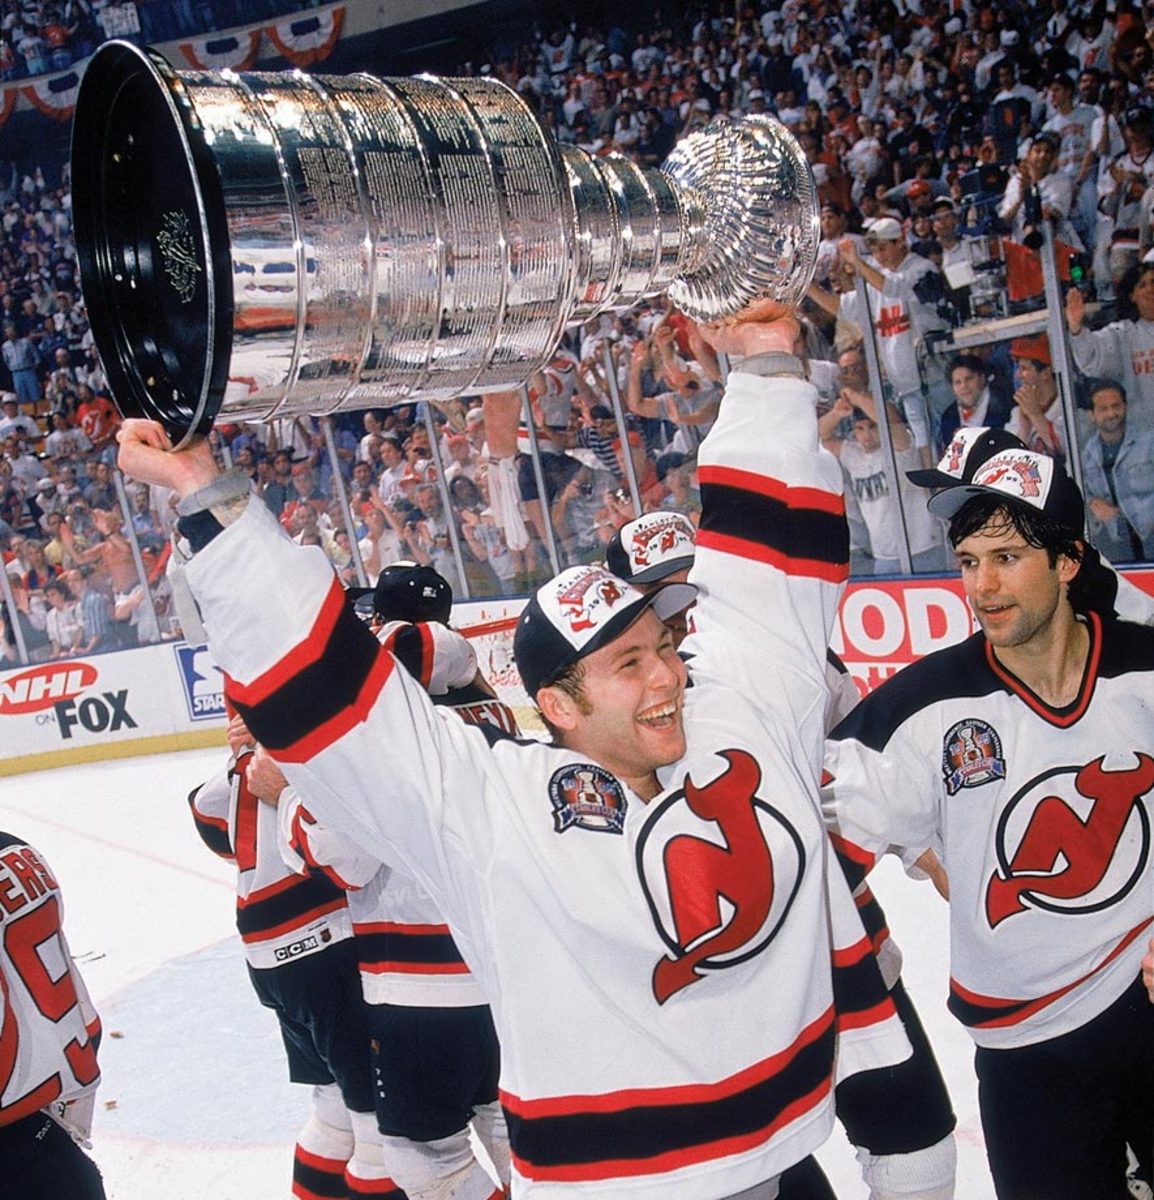 This Day in Hockey History – May 27, 1994 and 2003 – Brodeur's